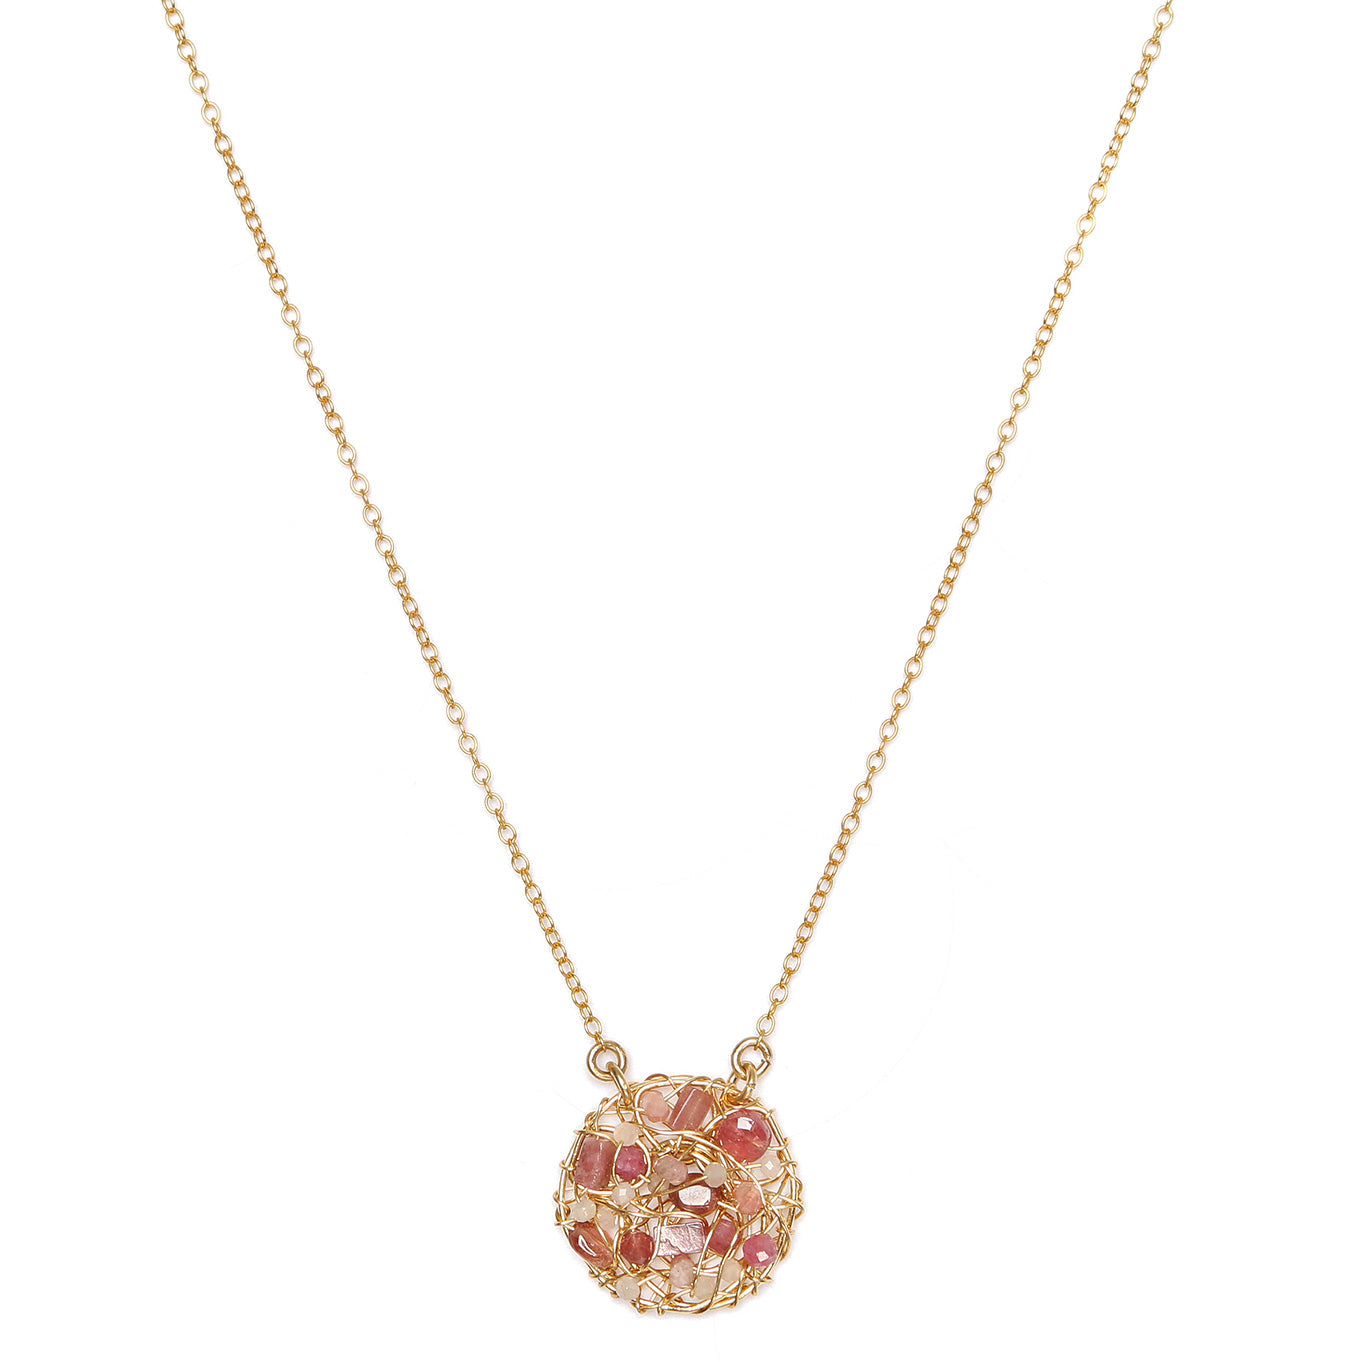 Aura Necklace #2 (20mm) - Rose Mix Gems Necklaces TARBAY   